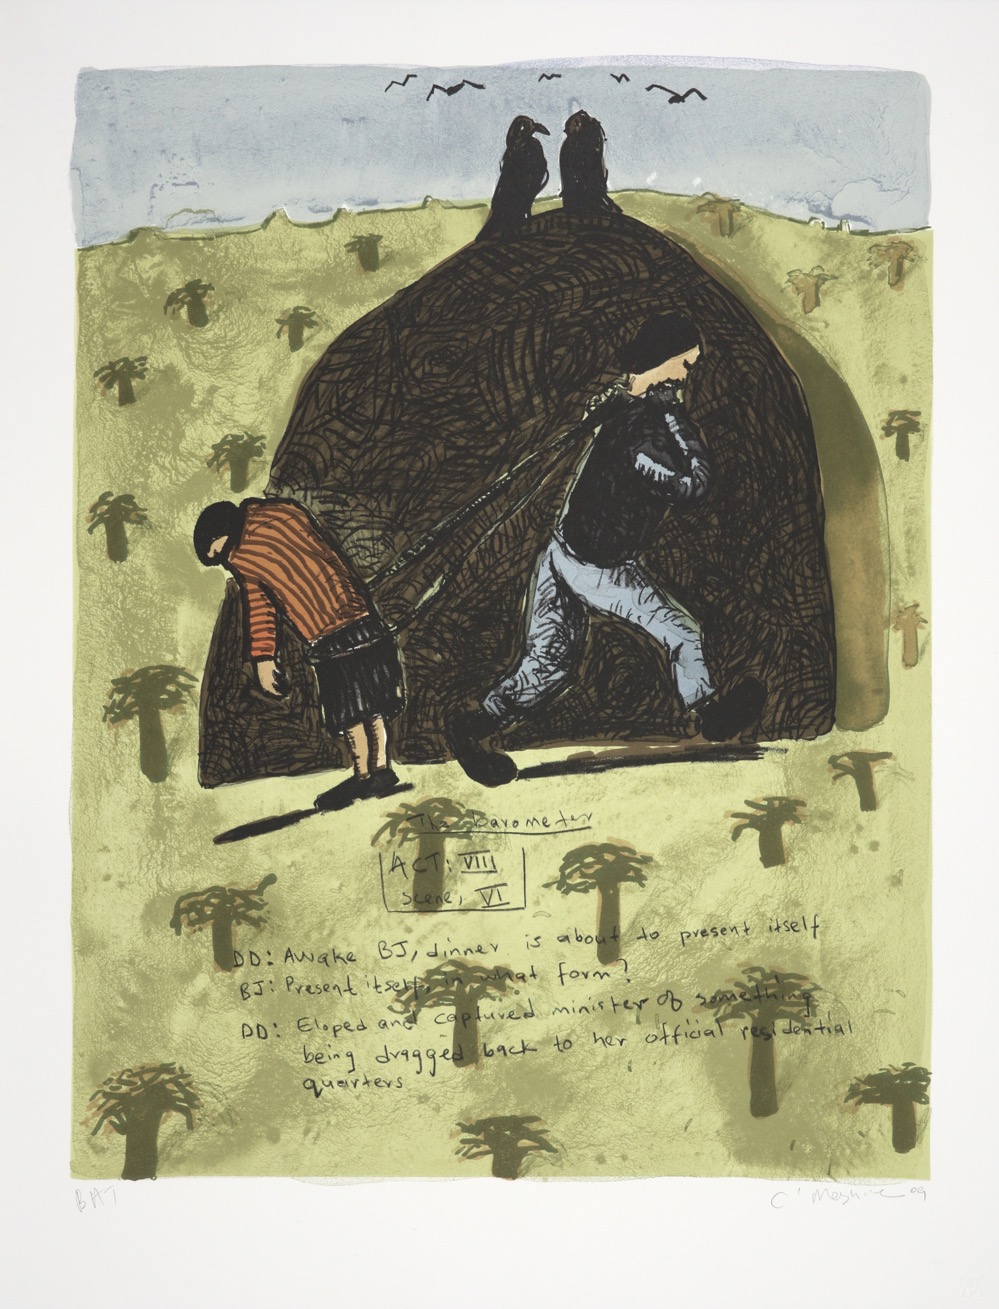 Two human figures roped together and facing opposite directions set in a landscape with two vultures.